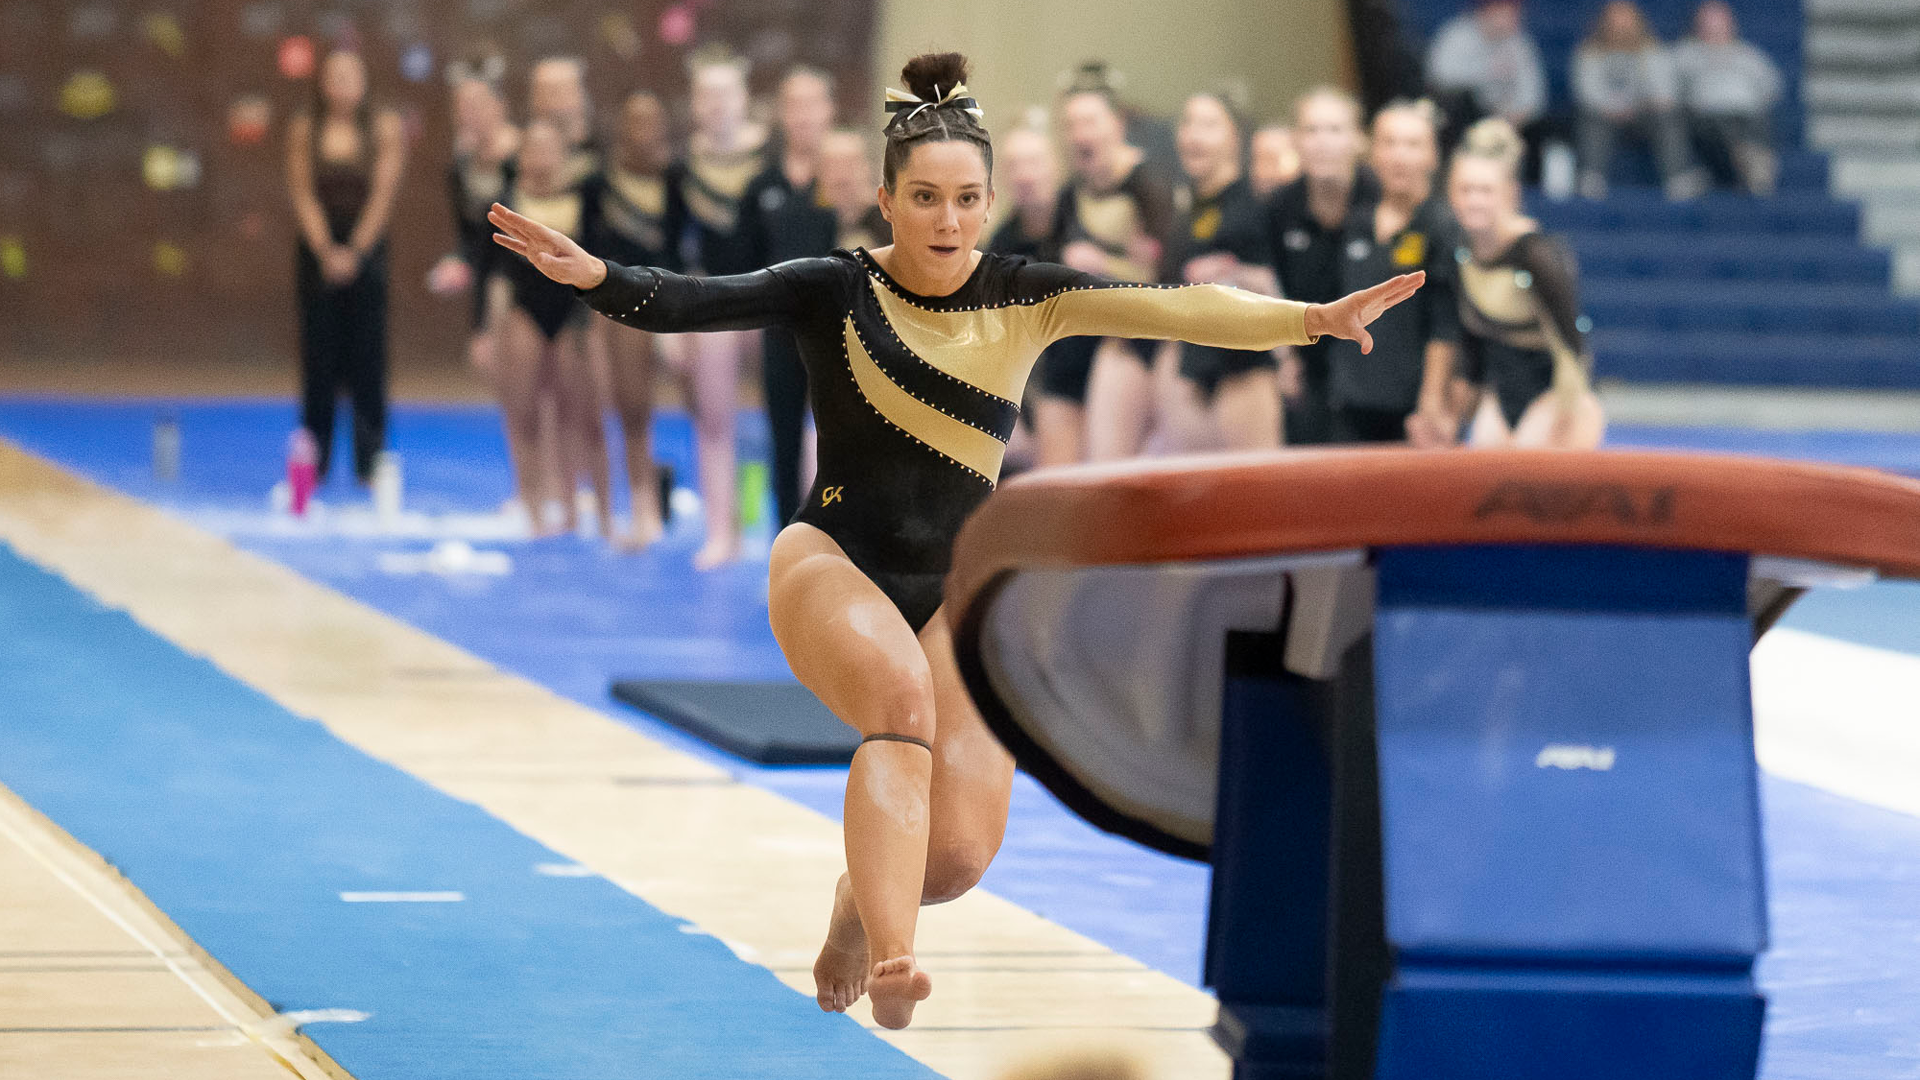 Emily Buffington scored 38.475 all-around points, including a career-best 9.775 on the balance beam in the Titans' win over Eau Claire. Photo Credit: Bill Hoepner, UW-Eau Claire